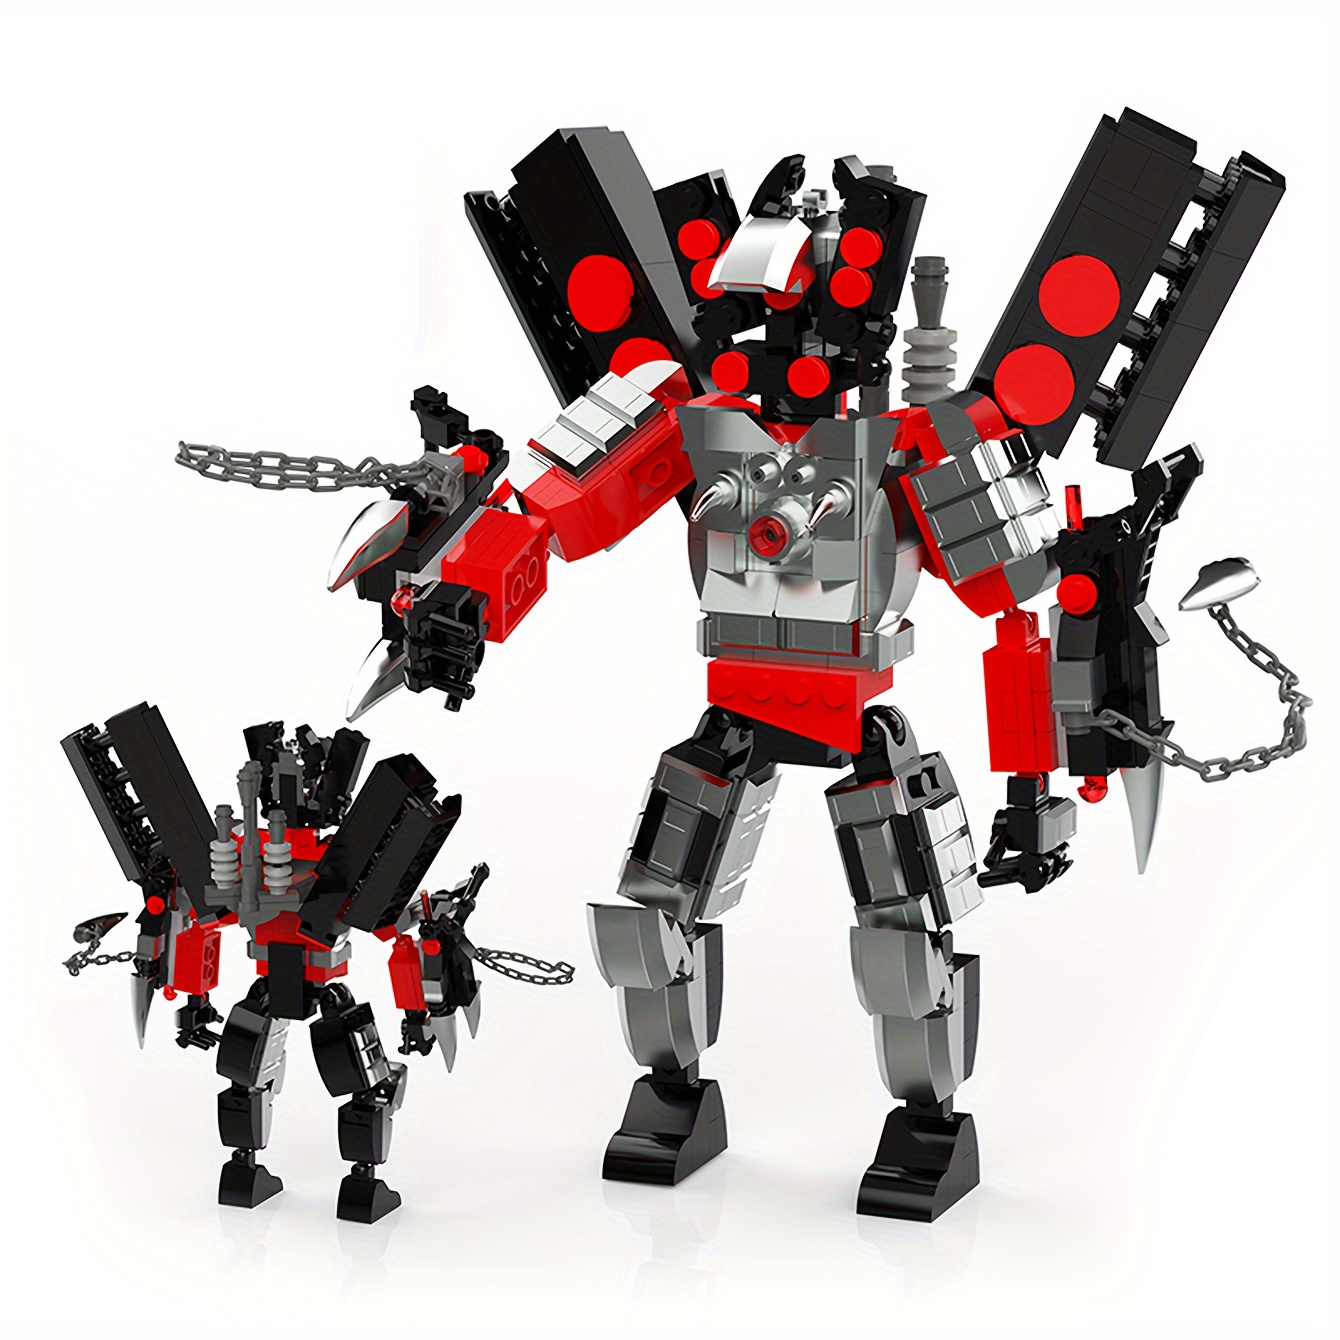 

Movie Series, Robot Building Block Sets, Anime Building Block Toy Models, Easter/thanksgiving/birthday Gifts